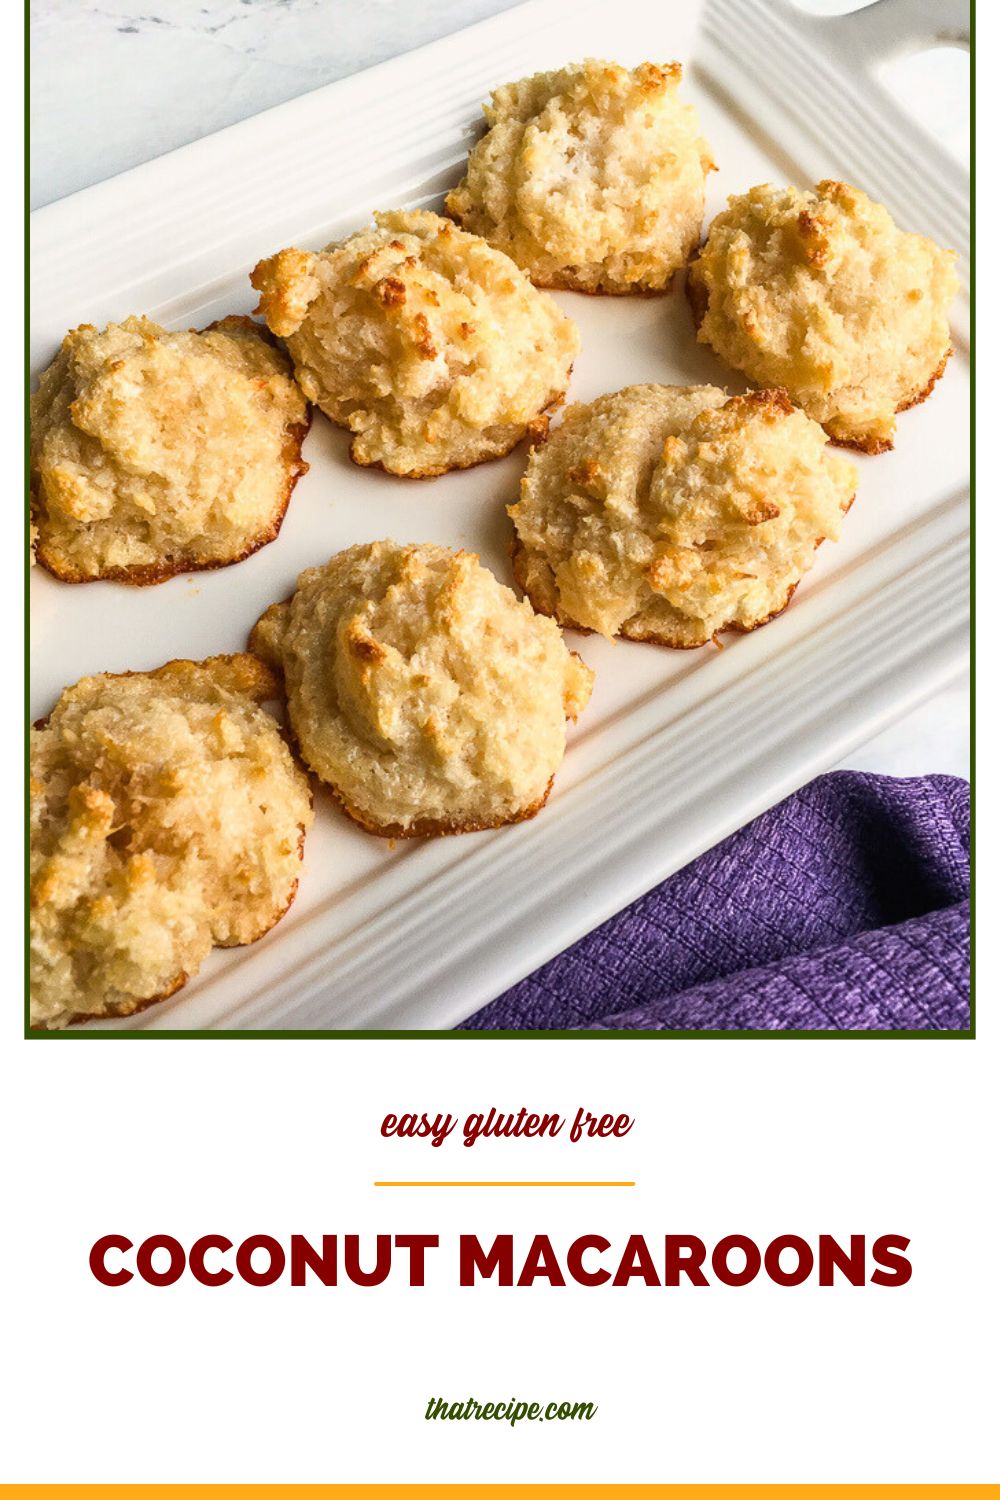 plate of cookies with text overlay "easy coconut macaroons"